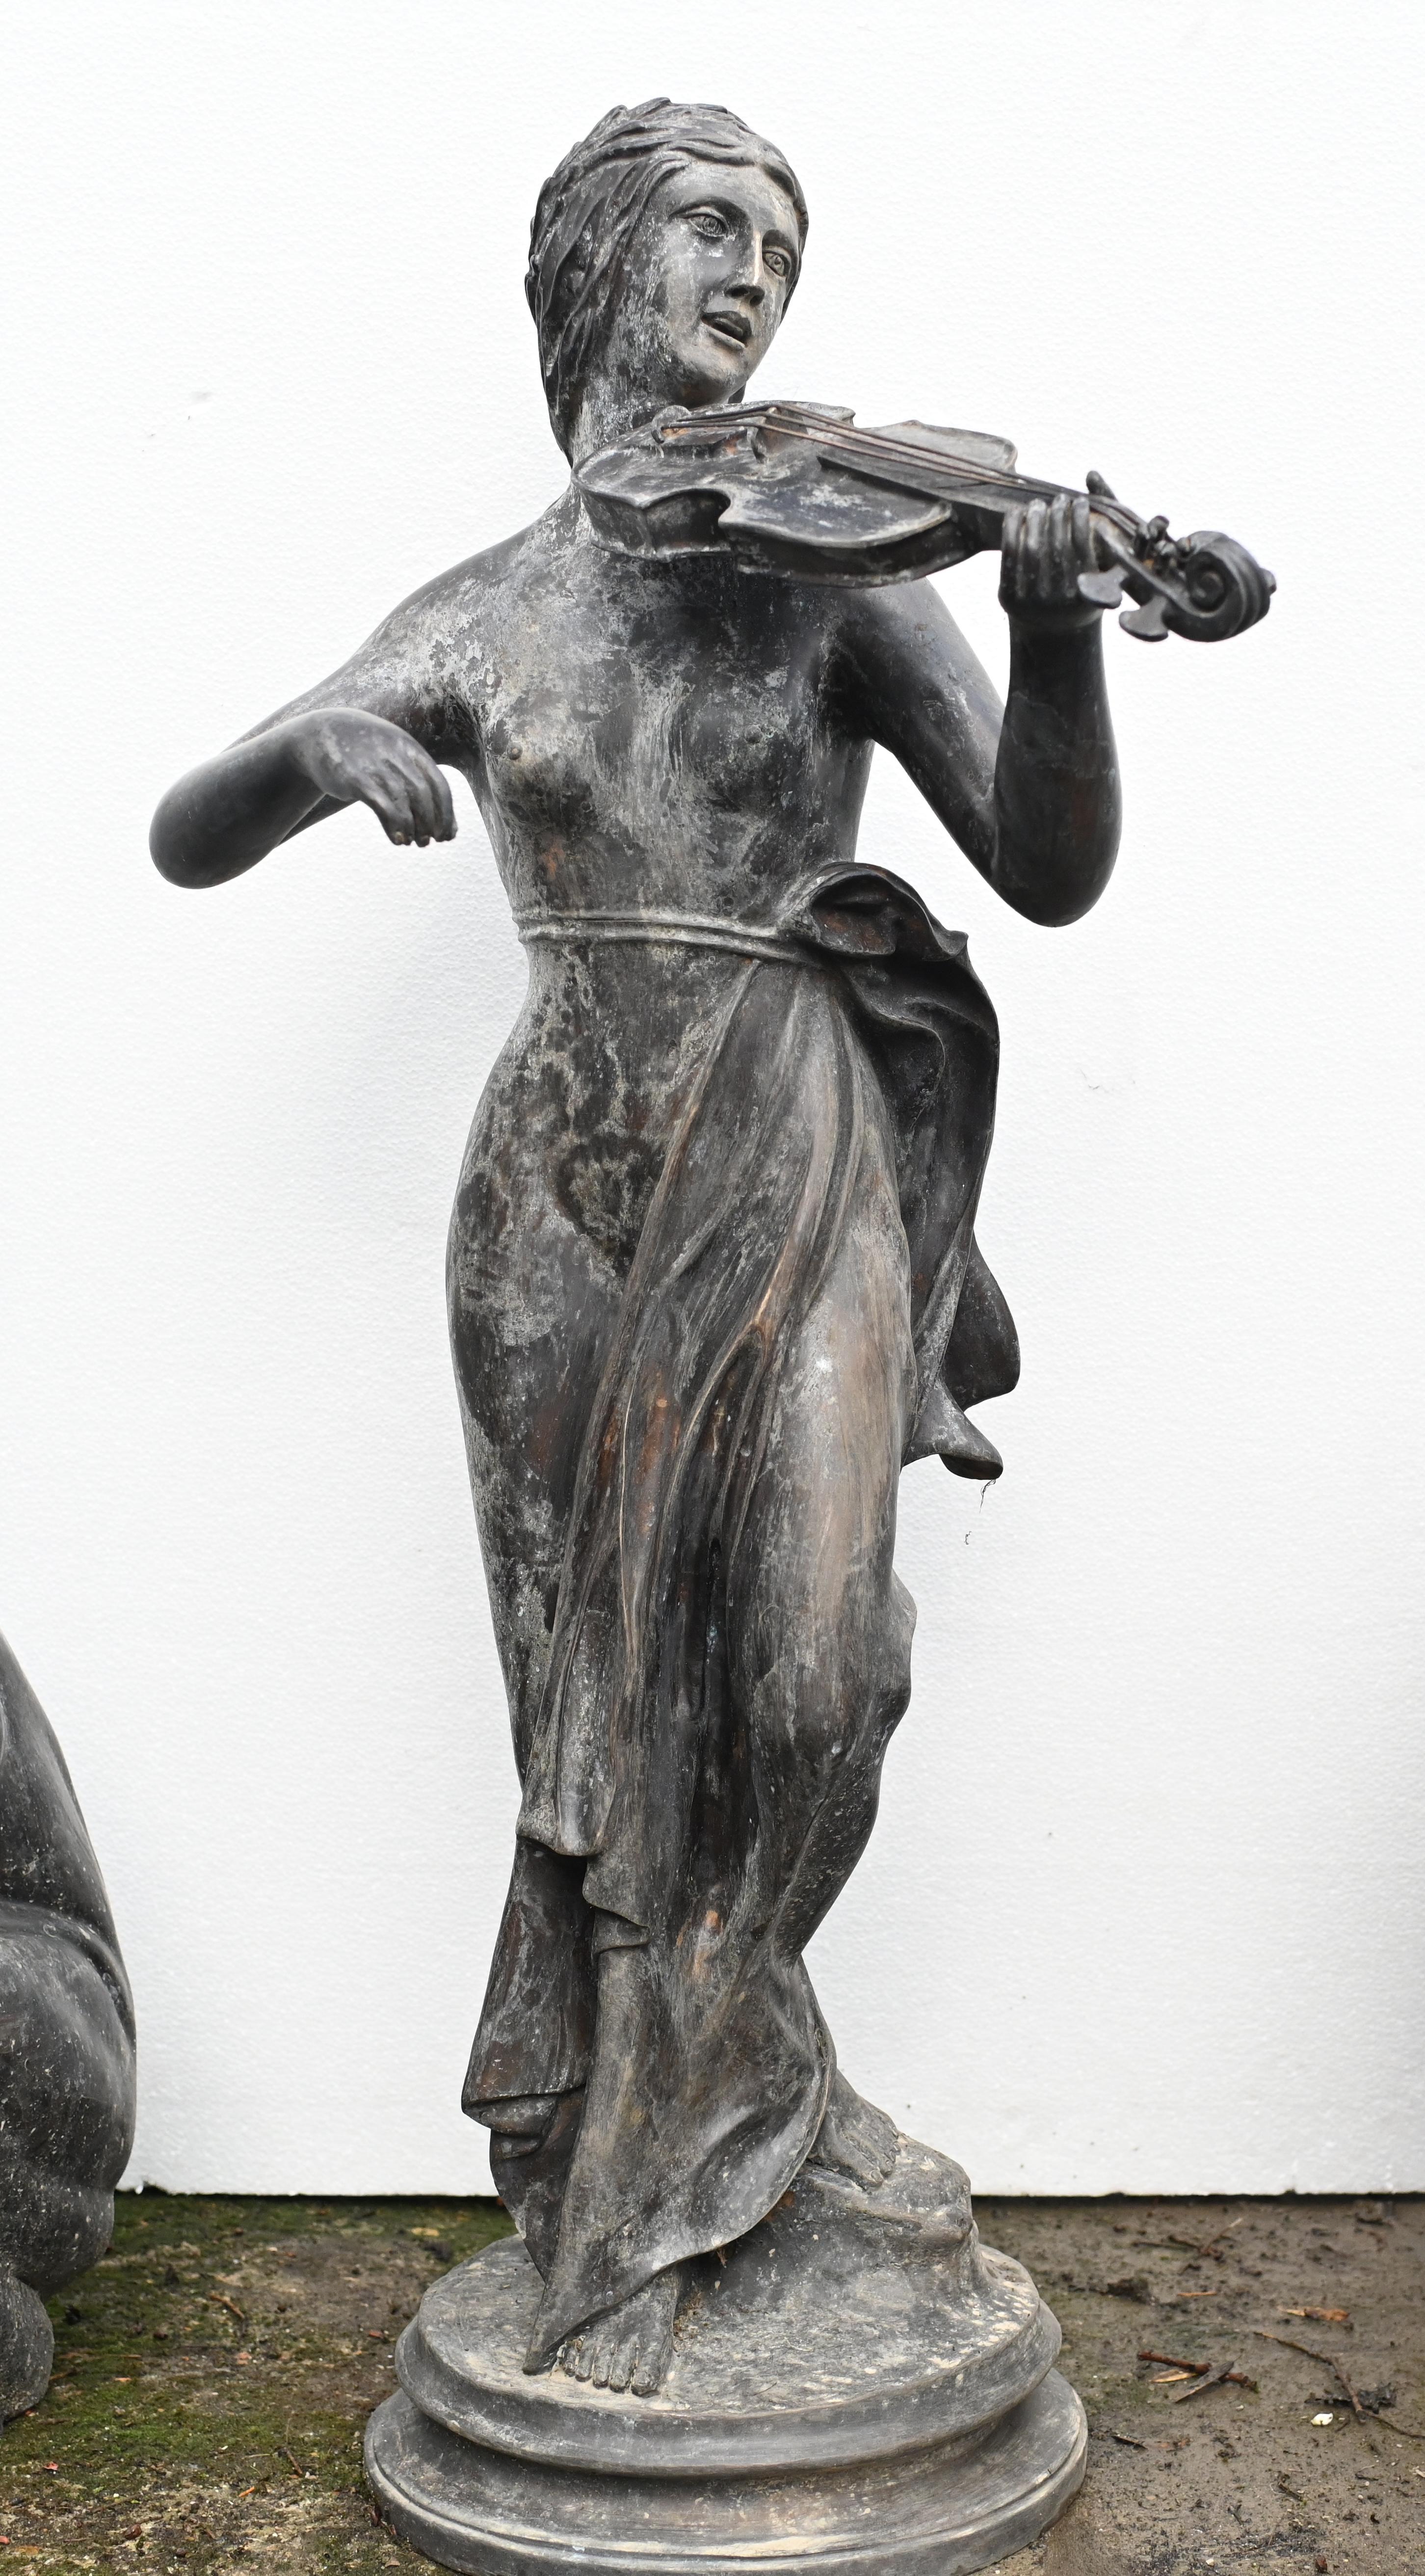 Classial Italian bronze statue depicting a toga clad female violinist
Over four feet tall - 104 CM - so good size
Would add an air of classical antiquity to any collection
Bought from a private house in London's Belgravia
Lovely patina to the bronze